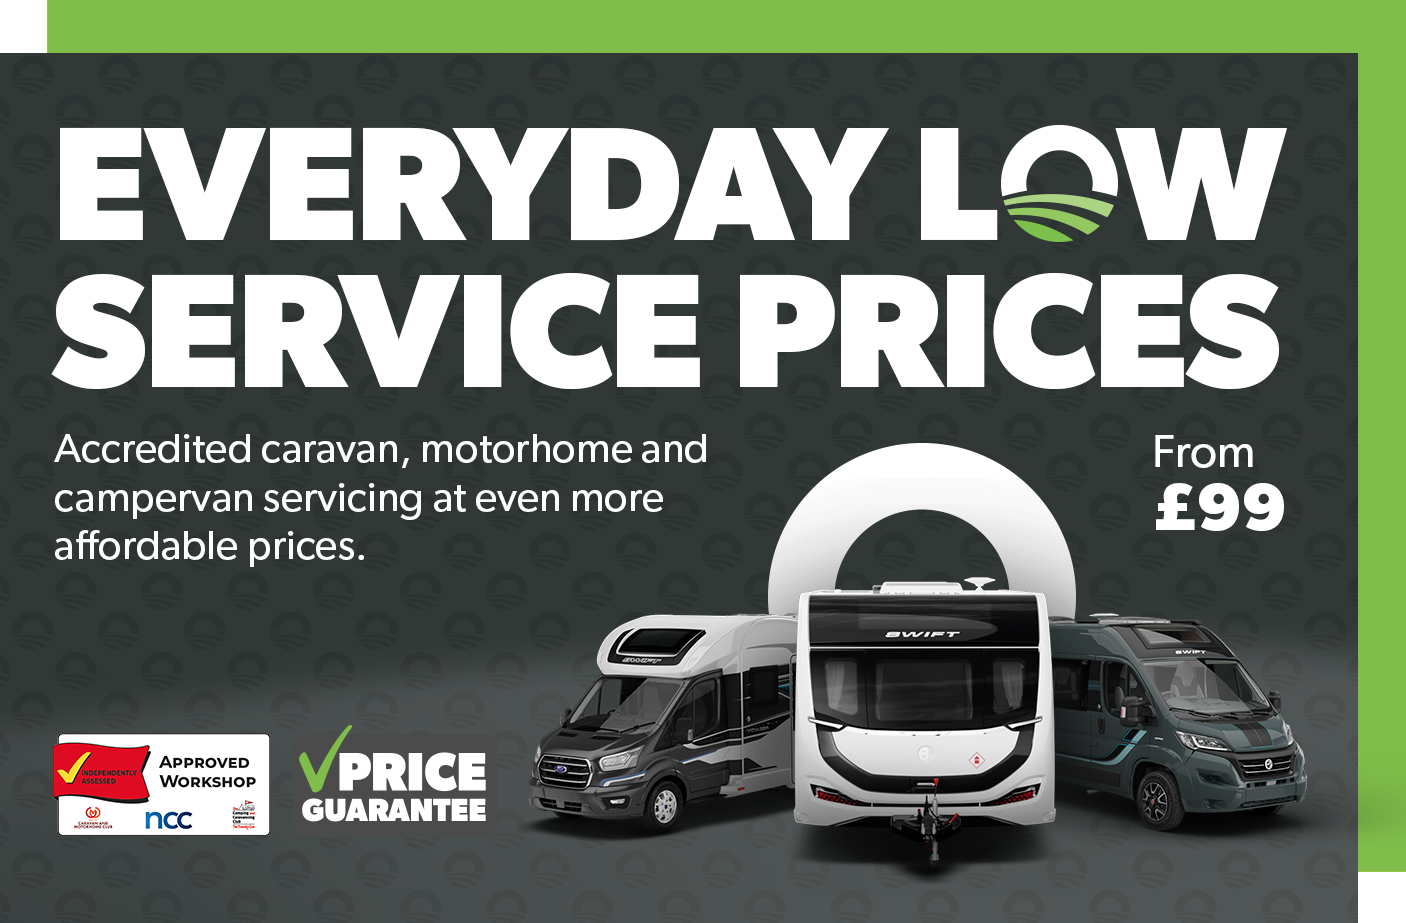 Leisure World Significantly Reduces Service Prices for Caravans, Motorhomes, and Campervans